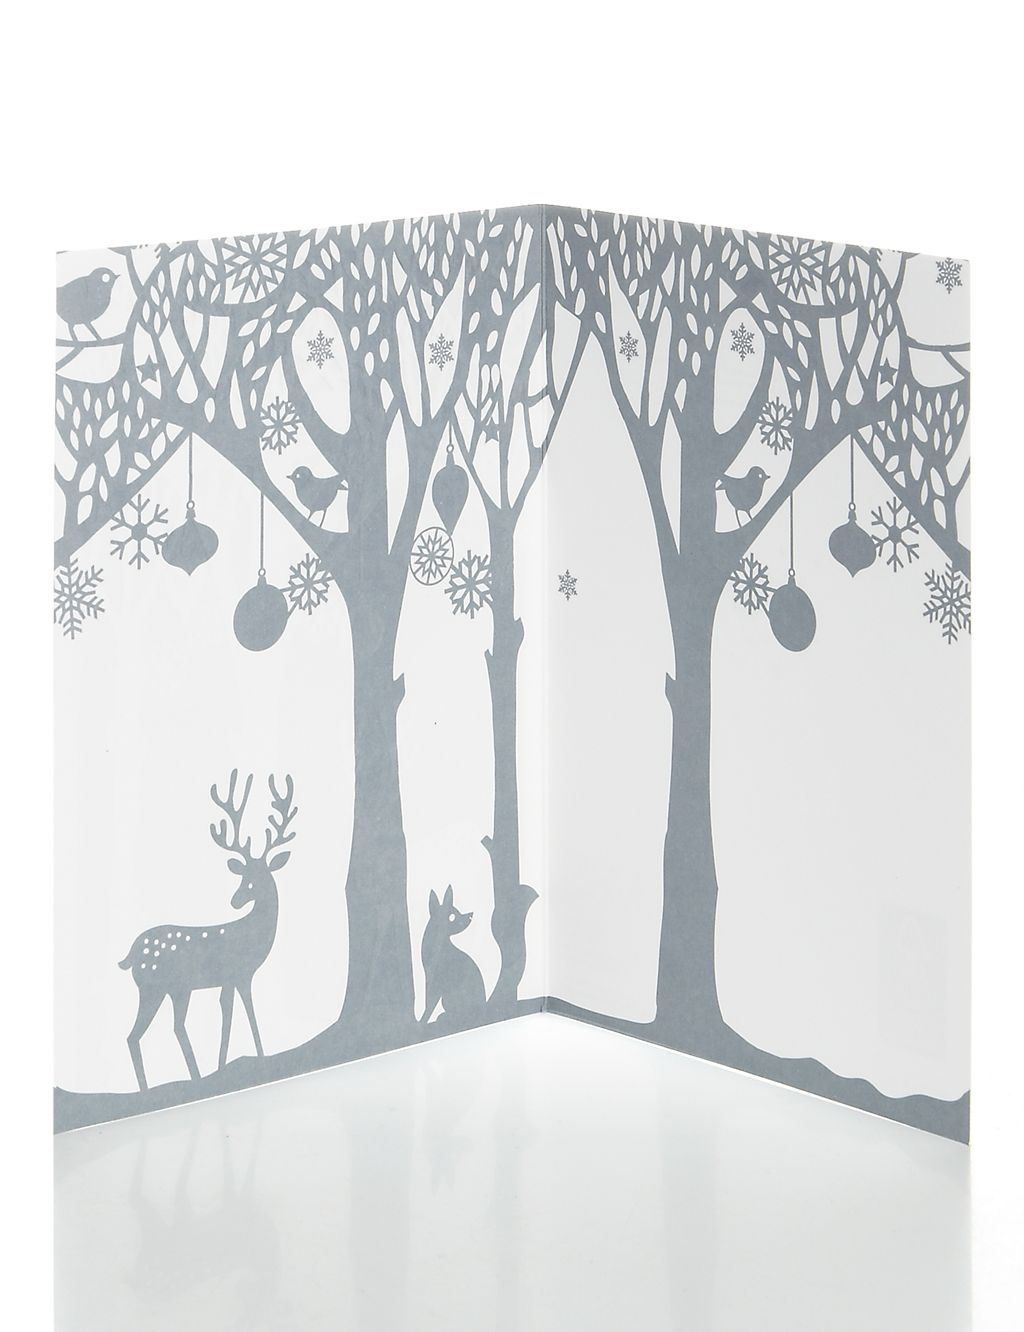 8 Silhouette Scene Luxury Christmas Multipack of Cards 1 of 3